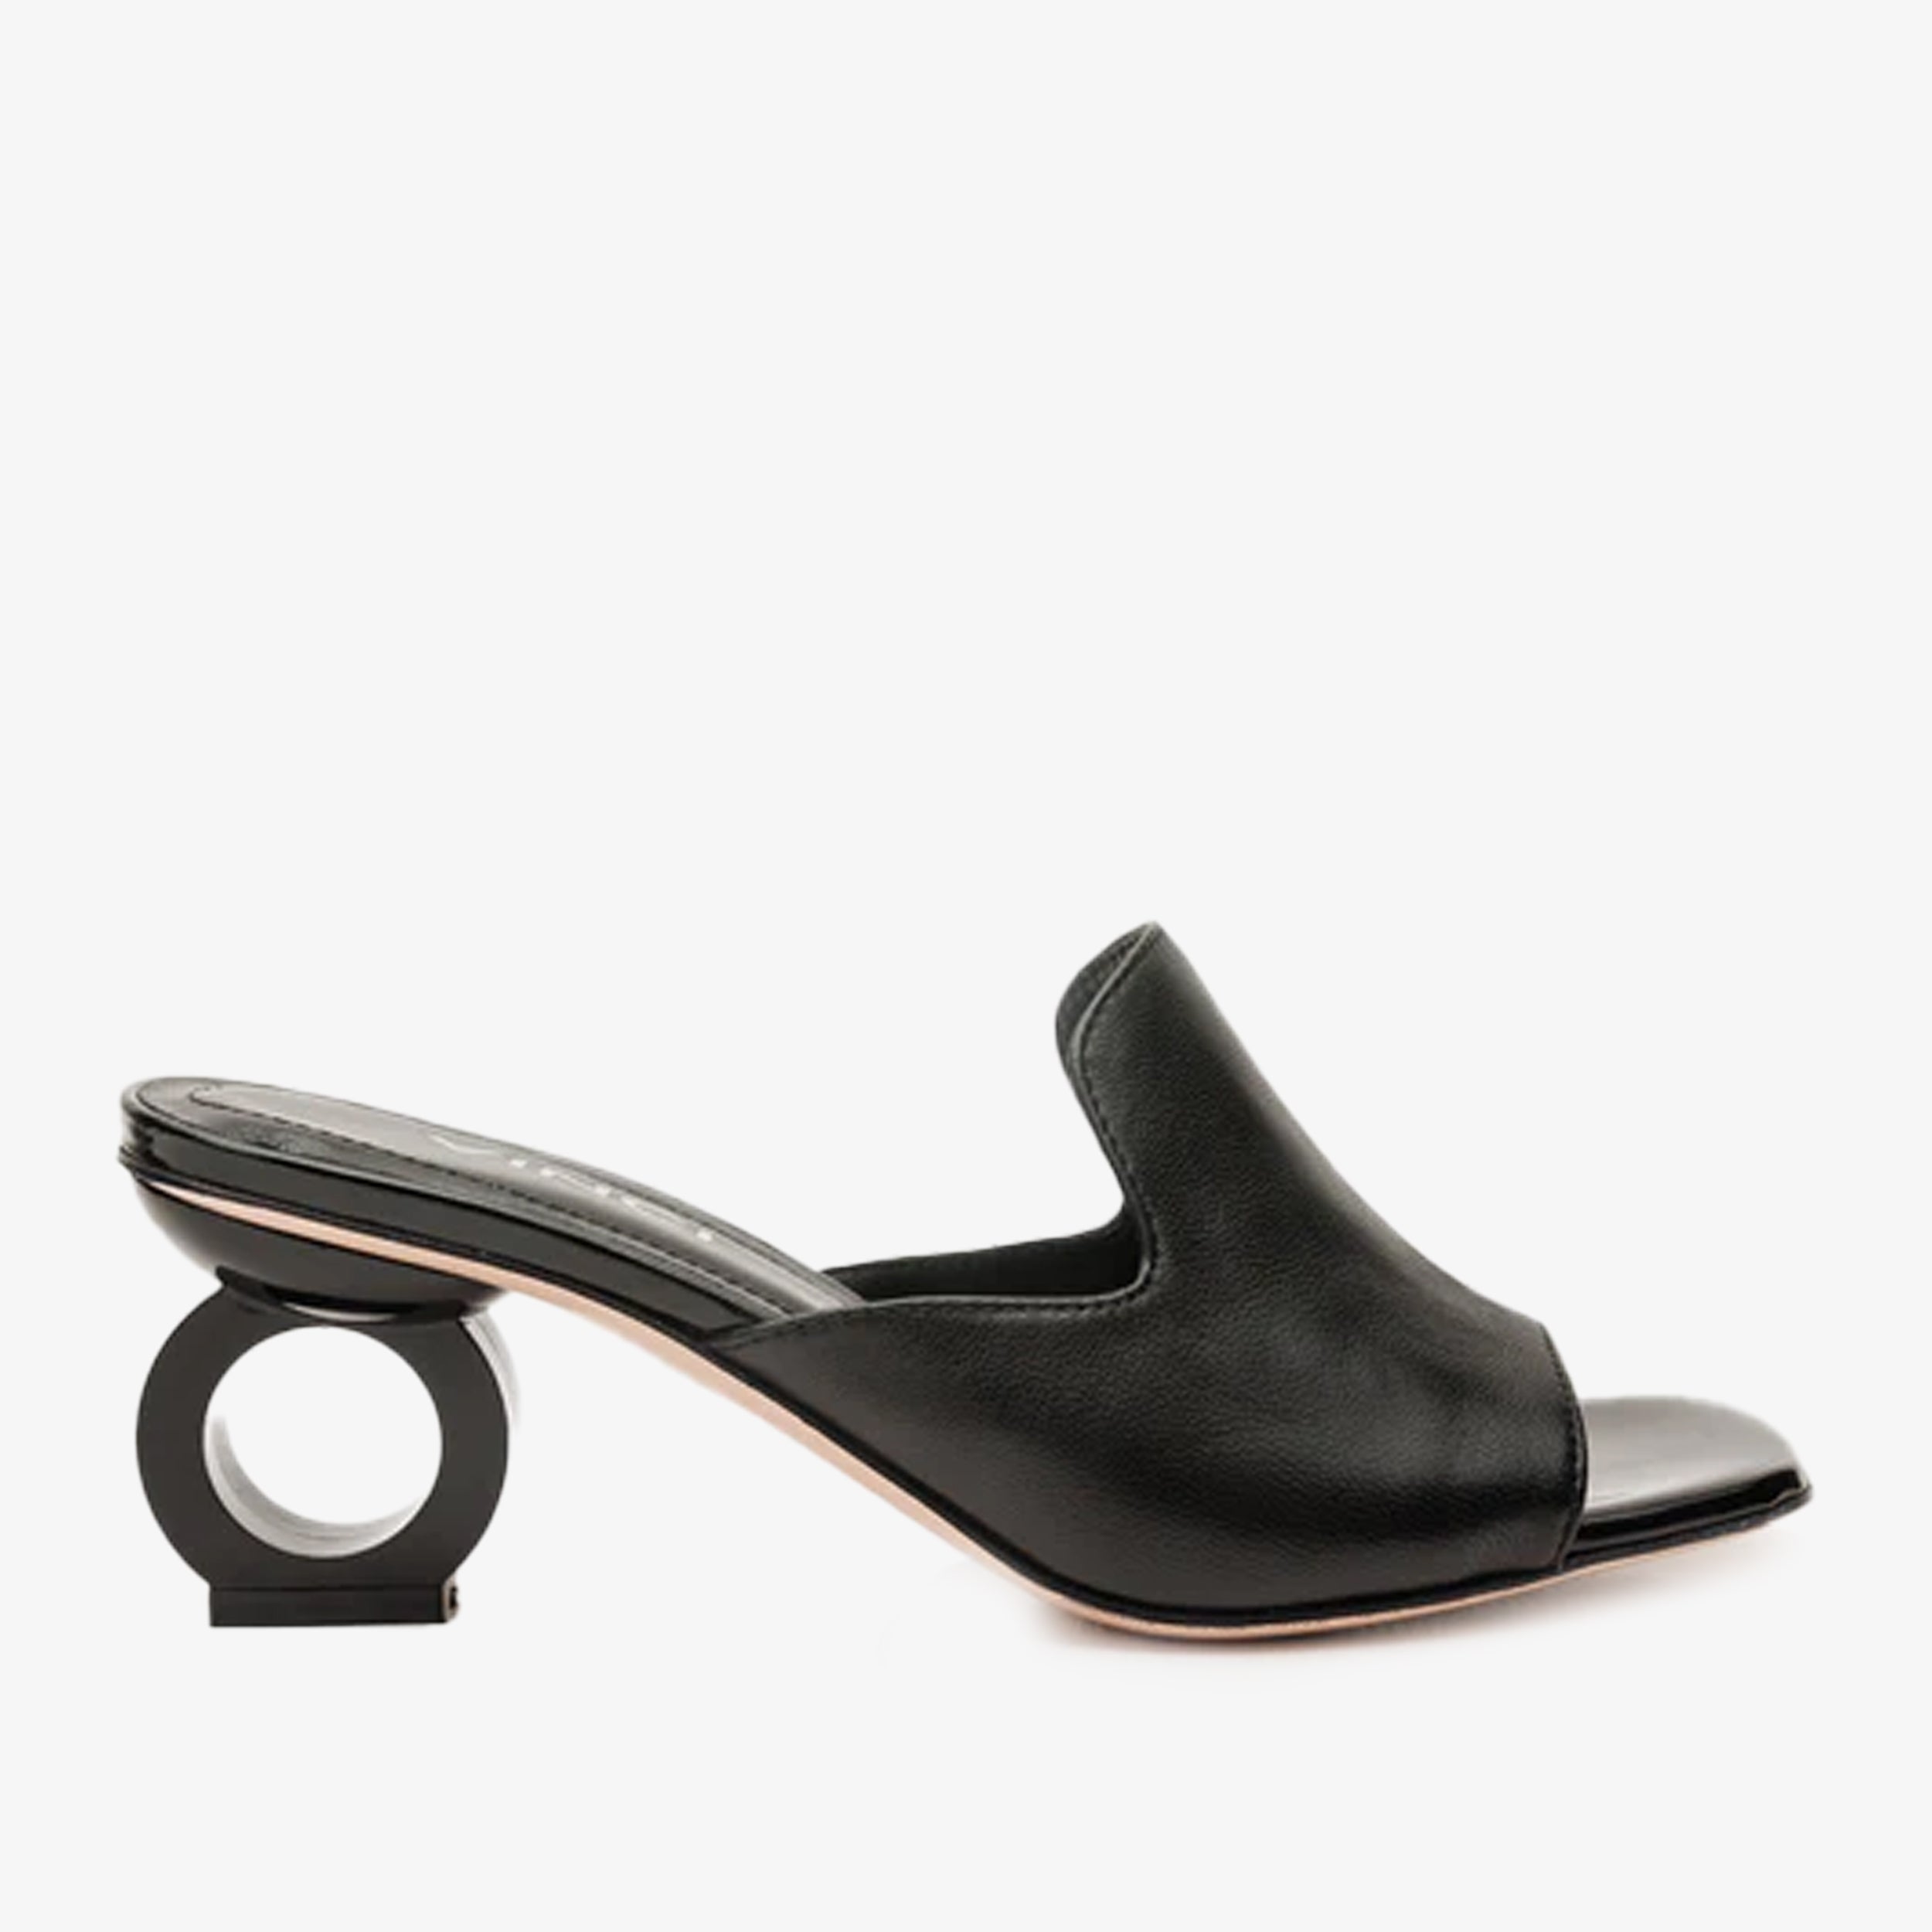 The Tory Black Leather Sandal